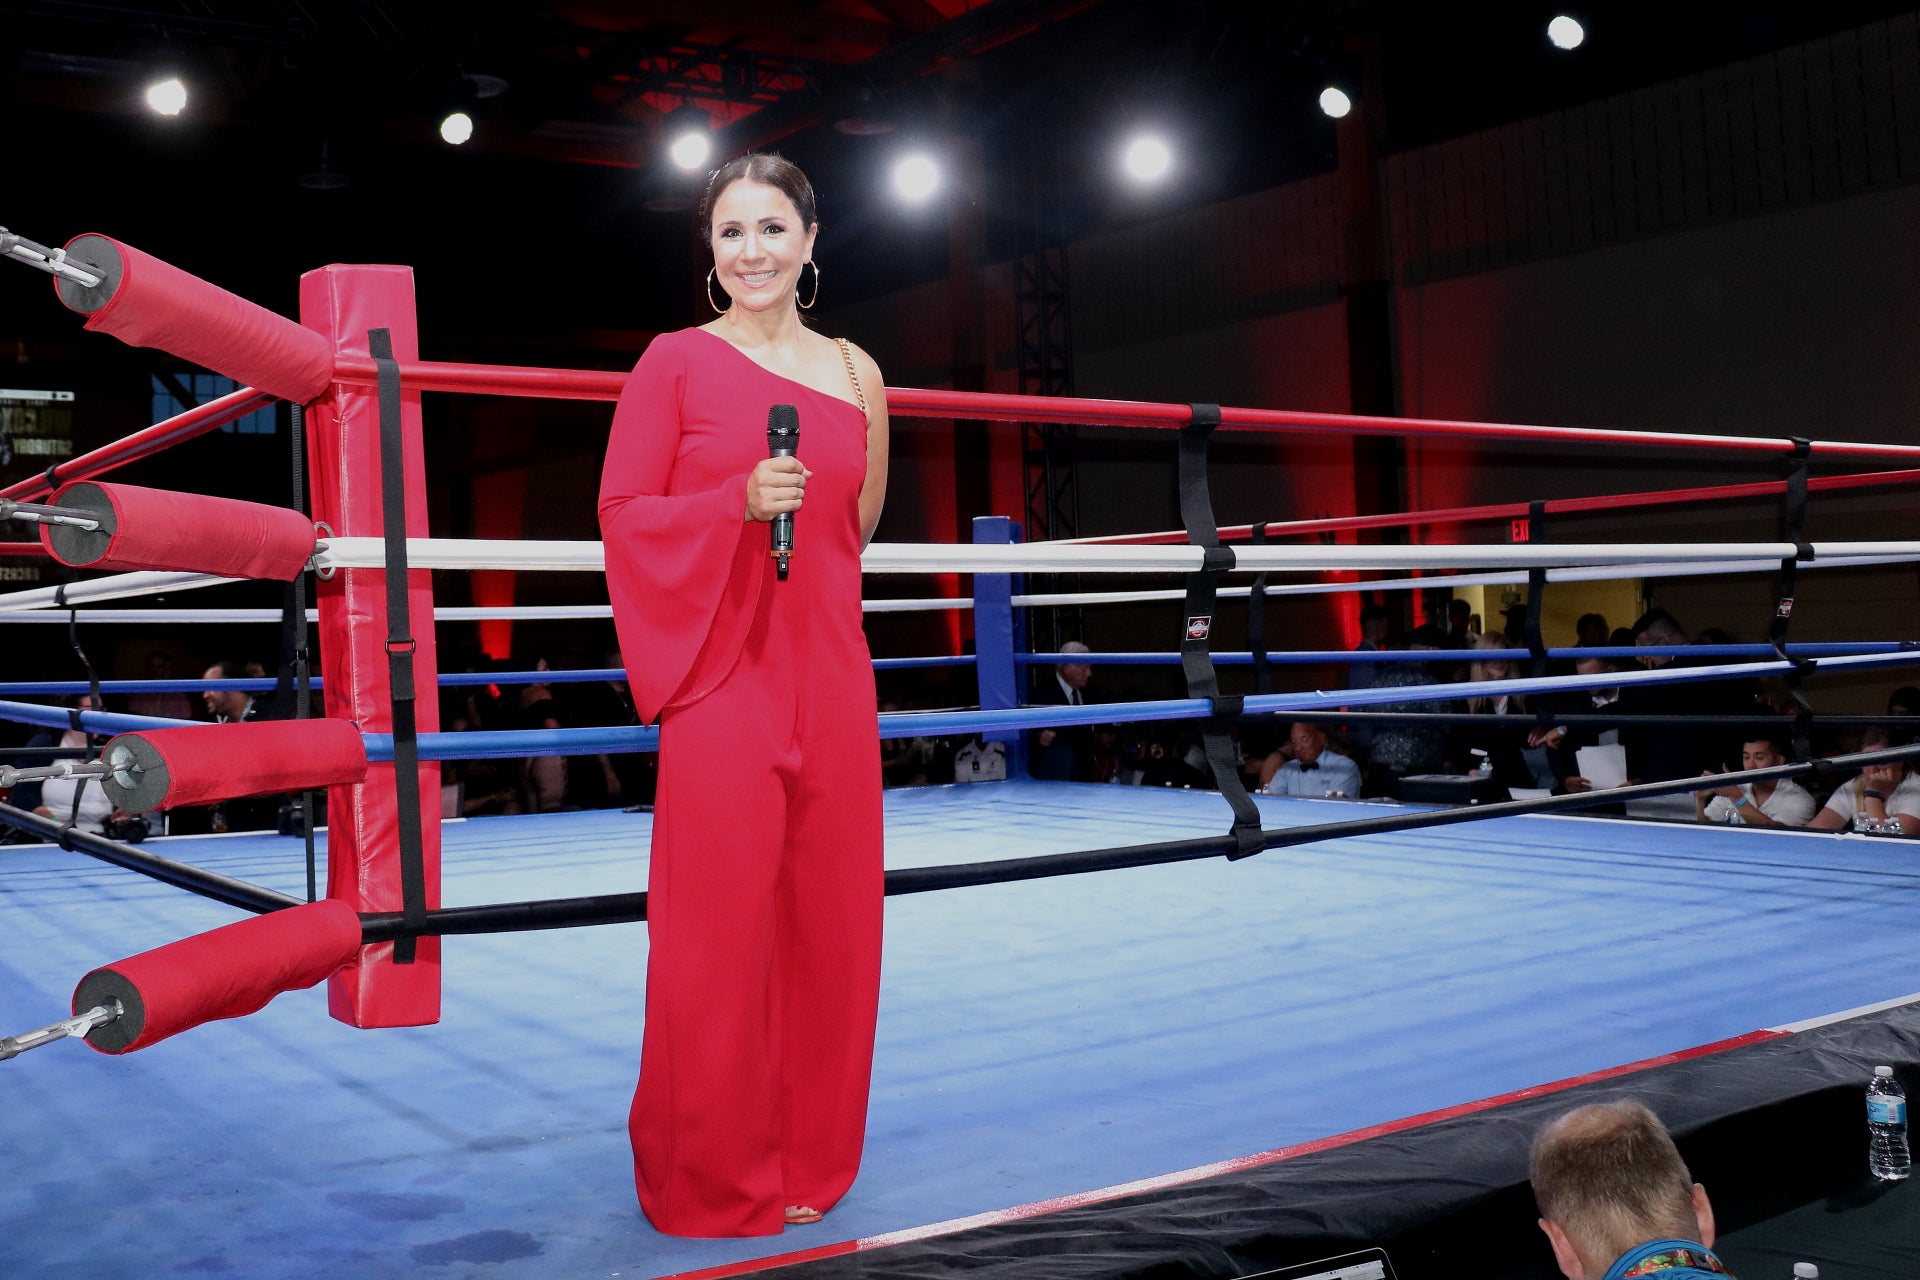 Yvette Raposo - female ring announcer in the ring with a microphone